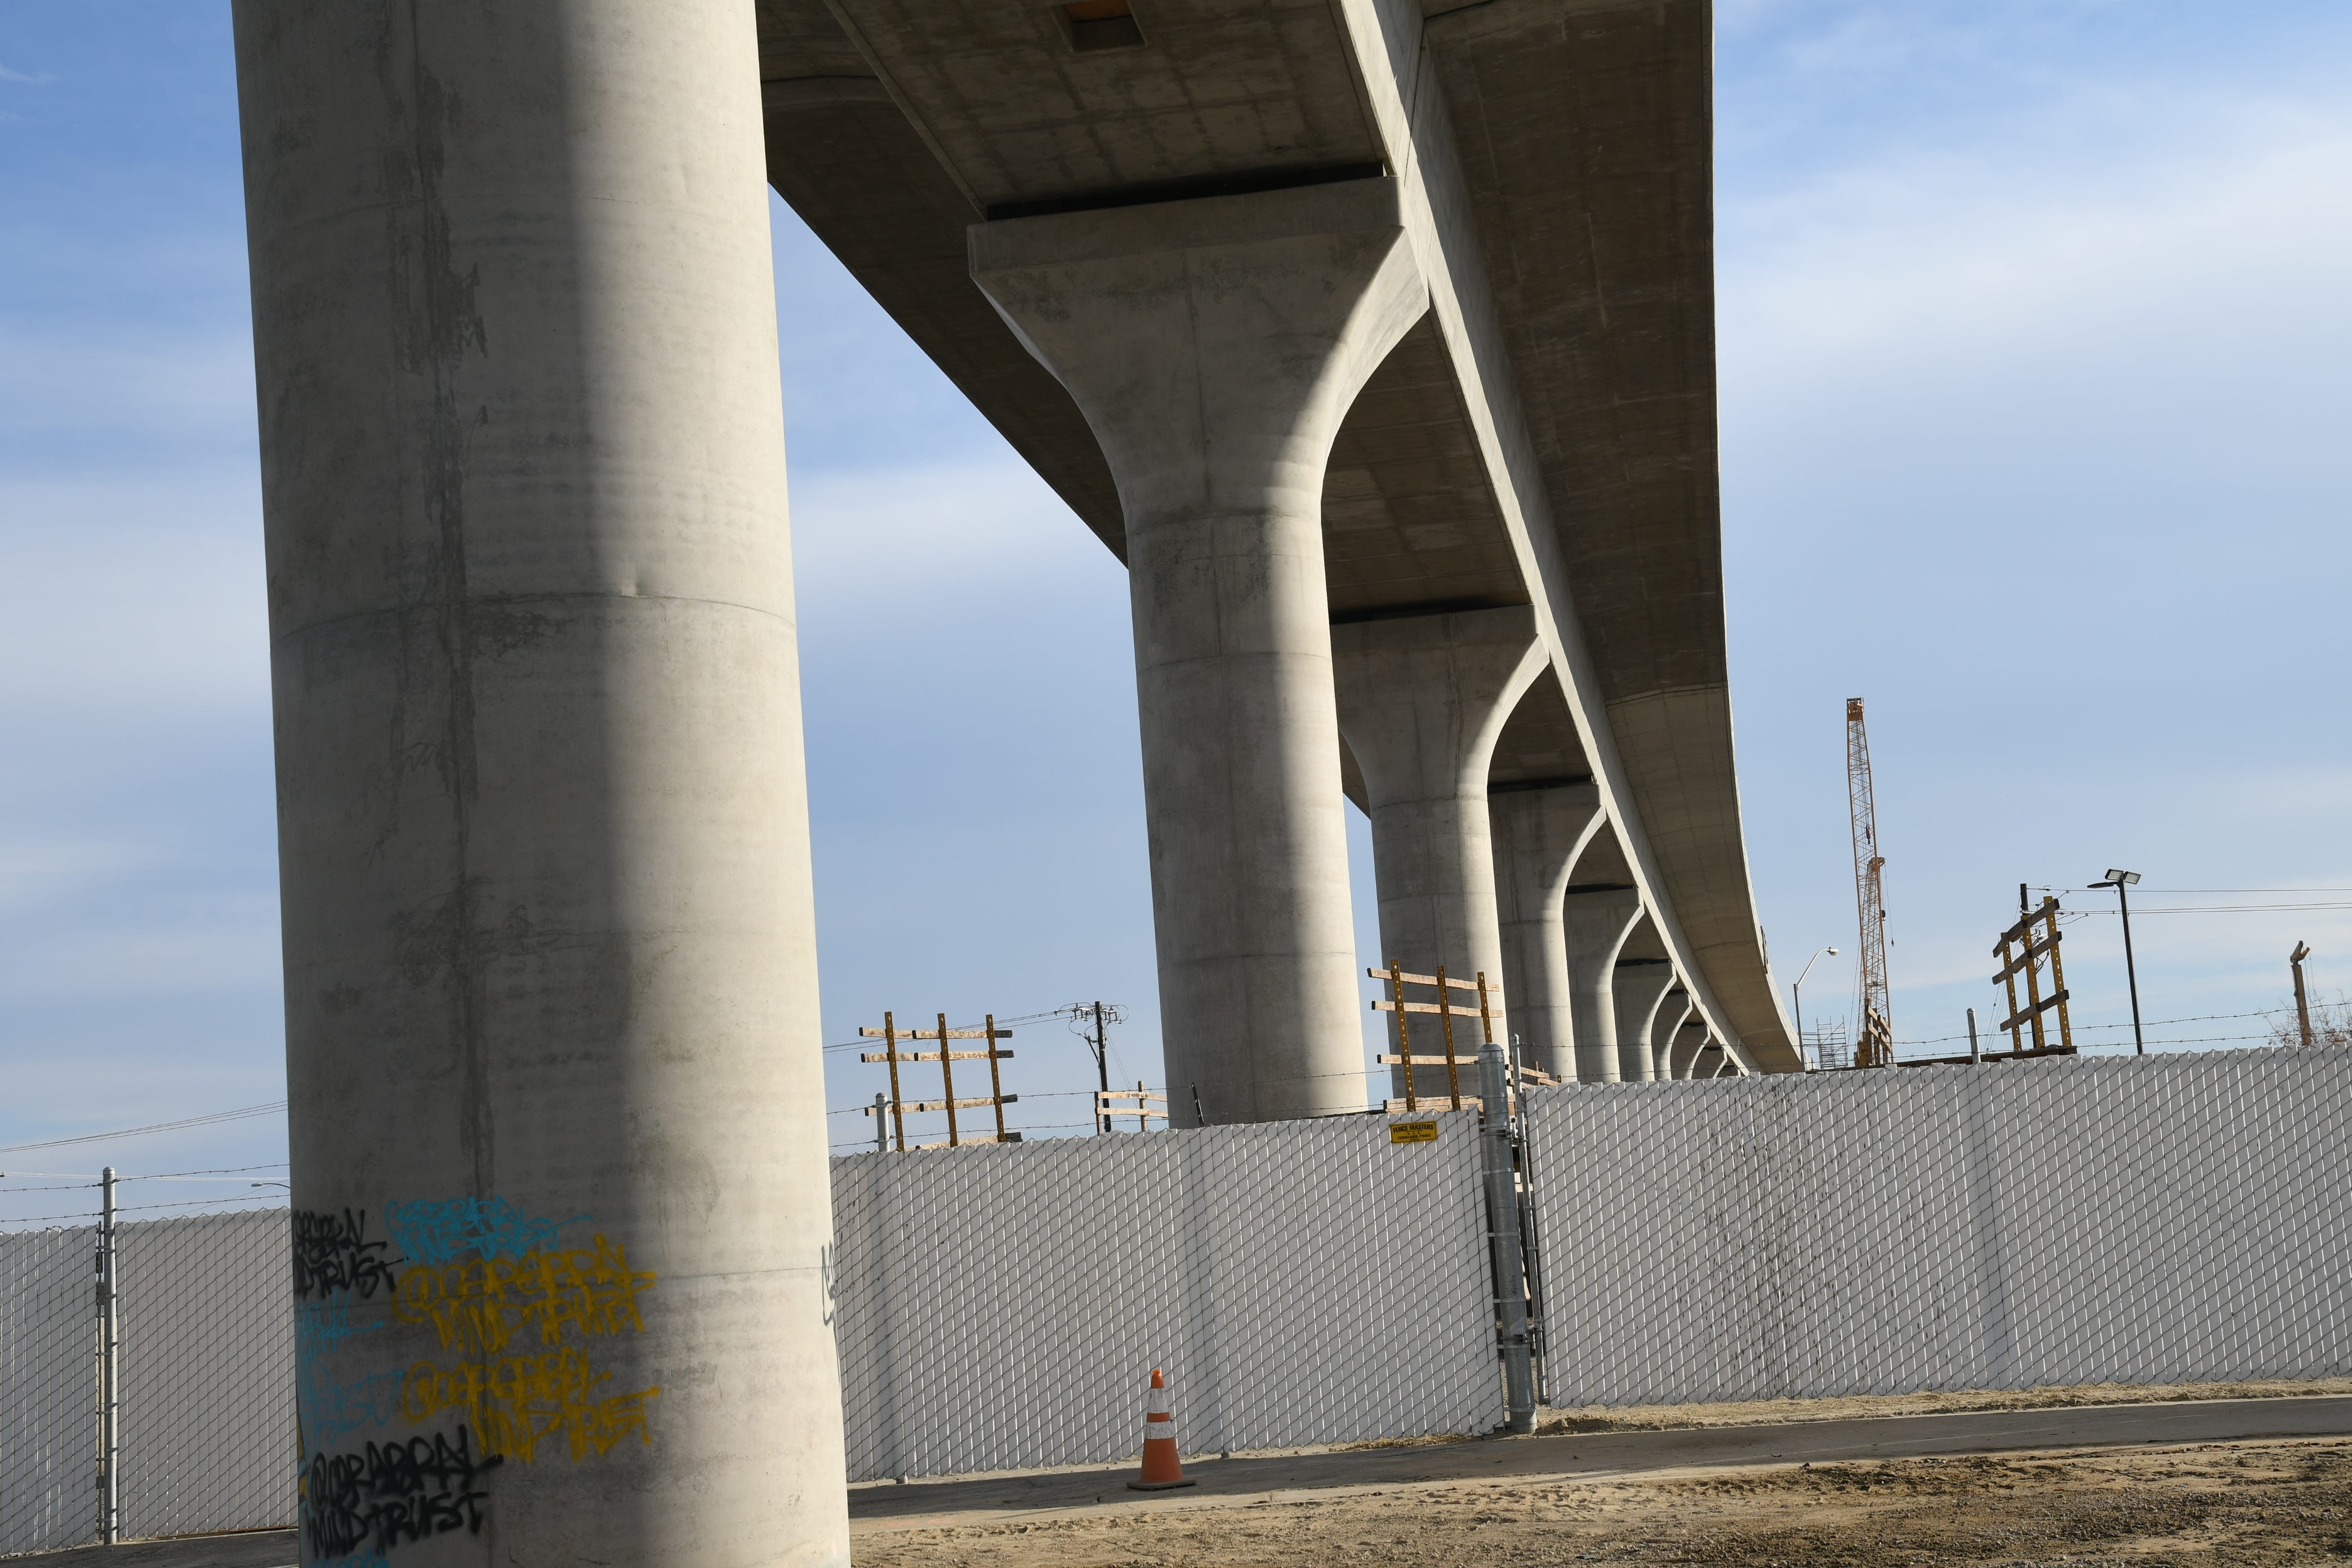 High-speed rail construction is underway in California's Central Valley. The first leg of the project will connect the cities of Bakersfield, Fresno, and Merced in the San Joaquin Valley.